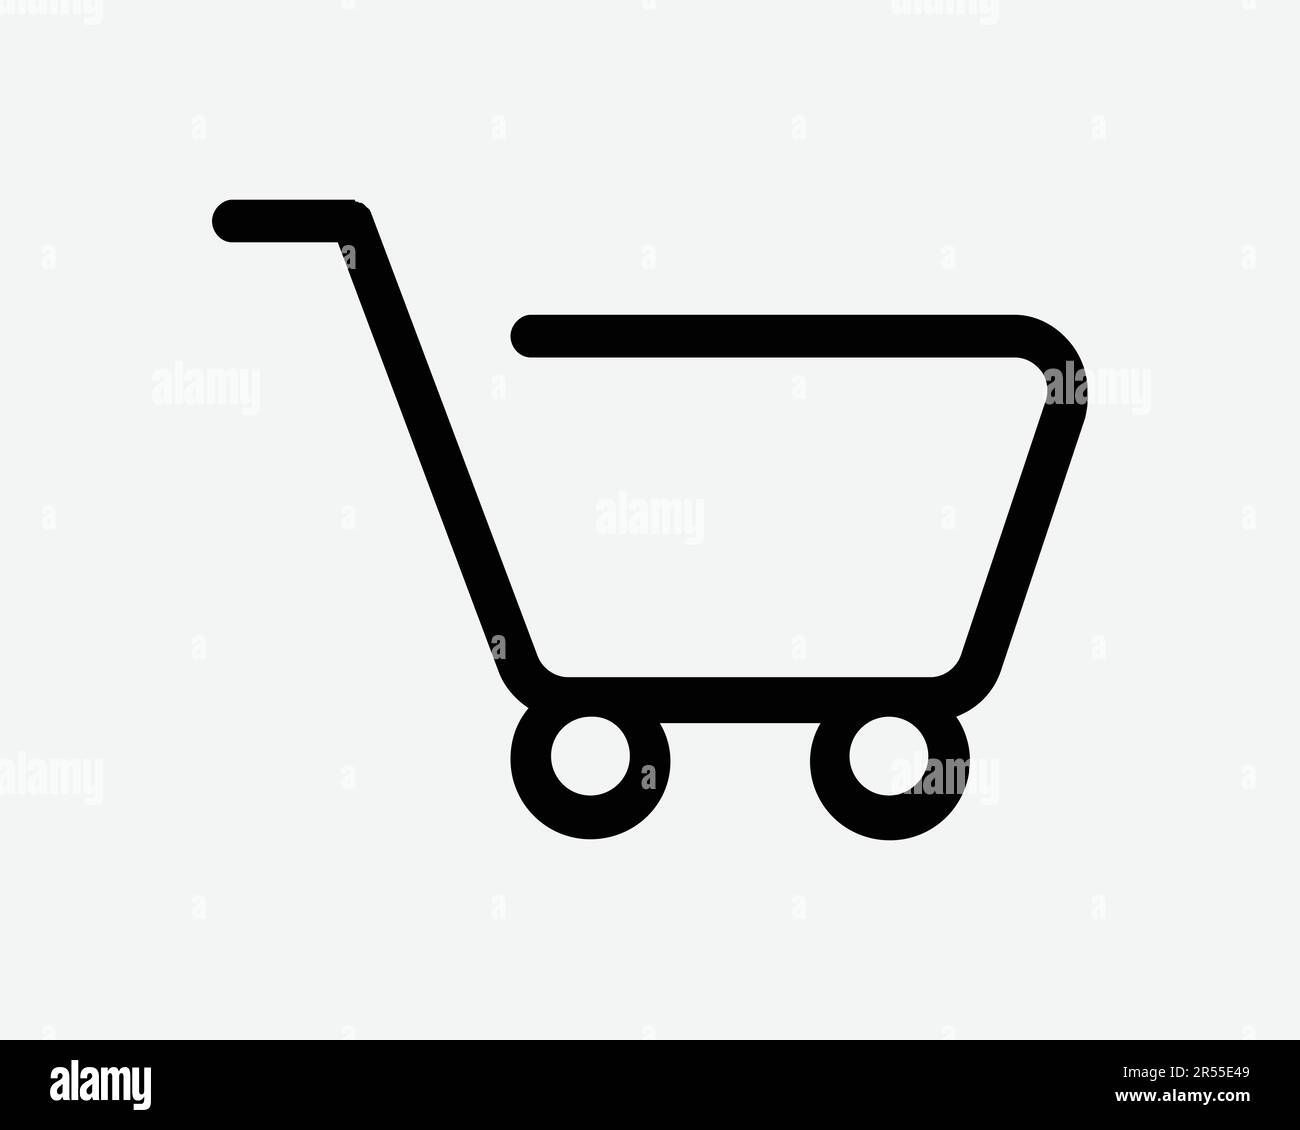 Shopping Cart Line Icon. Retail Trolley Check Out Business E-commerce Online Store Sign Symbol Black Artwork Graphic Illustration Clipart EPS Vector Stock Vector